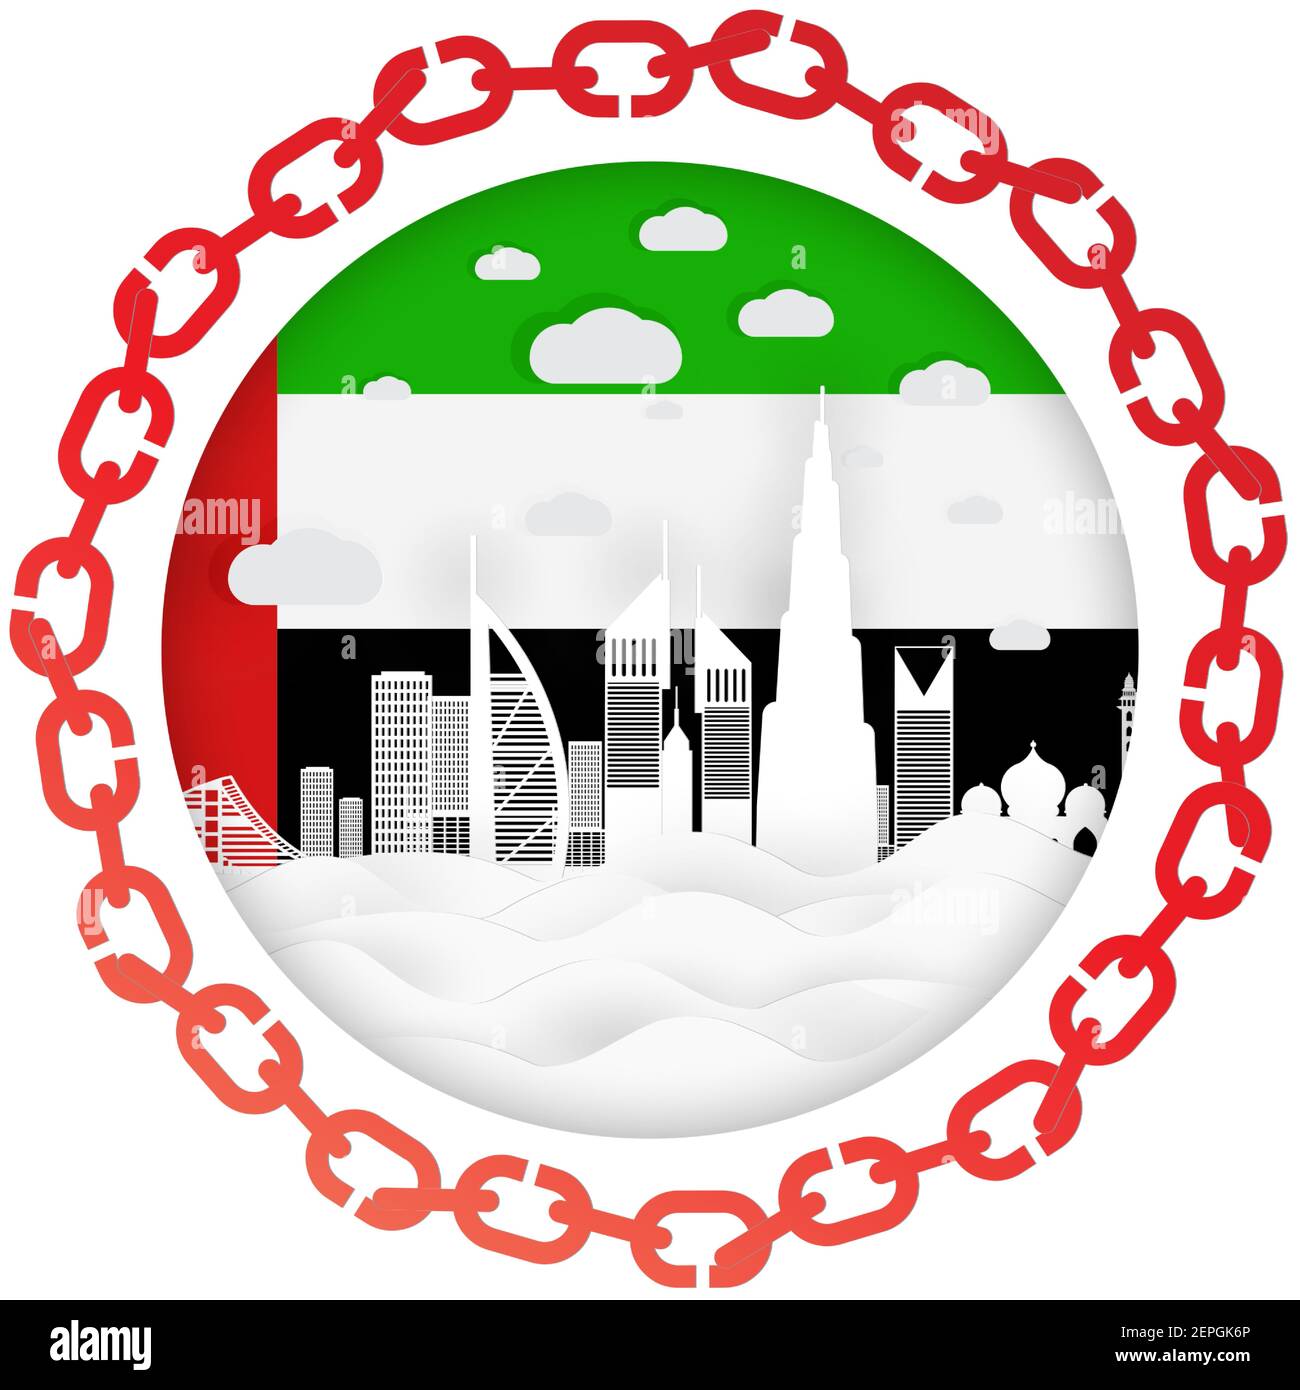 City view of dubai with paper cut style Stock Vector